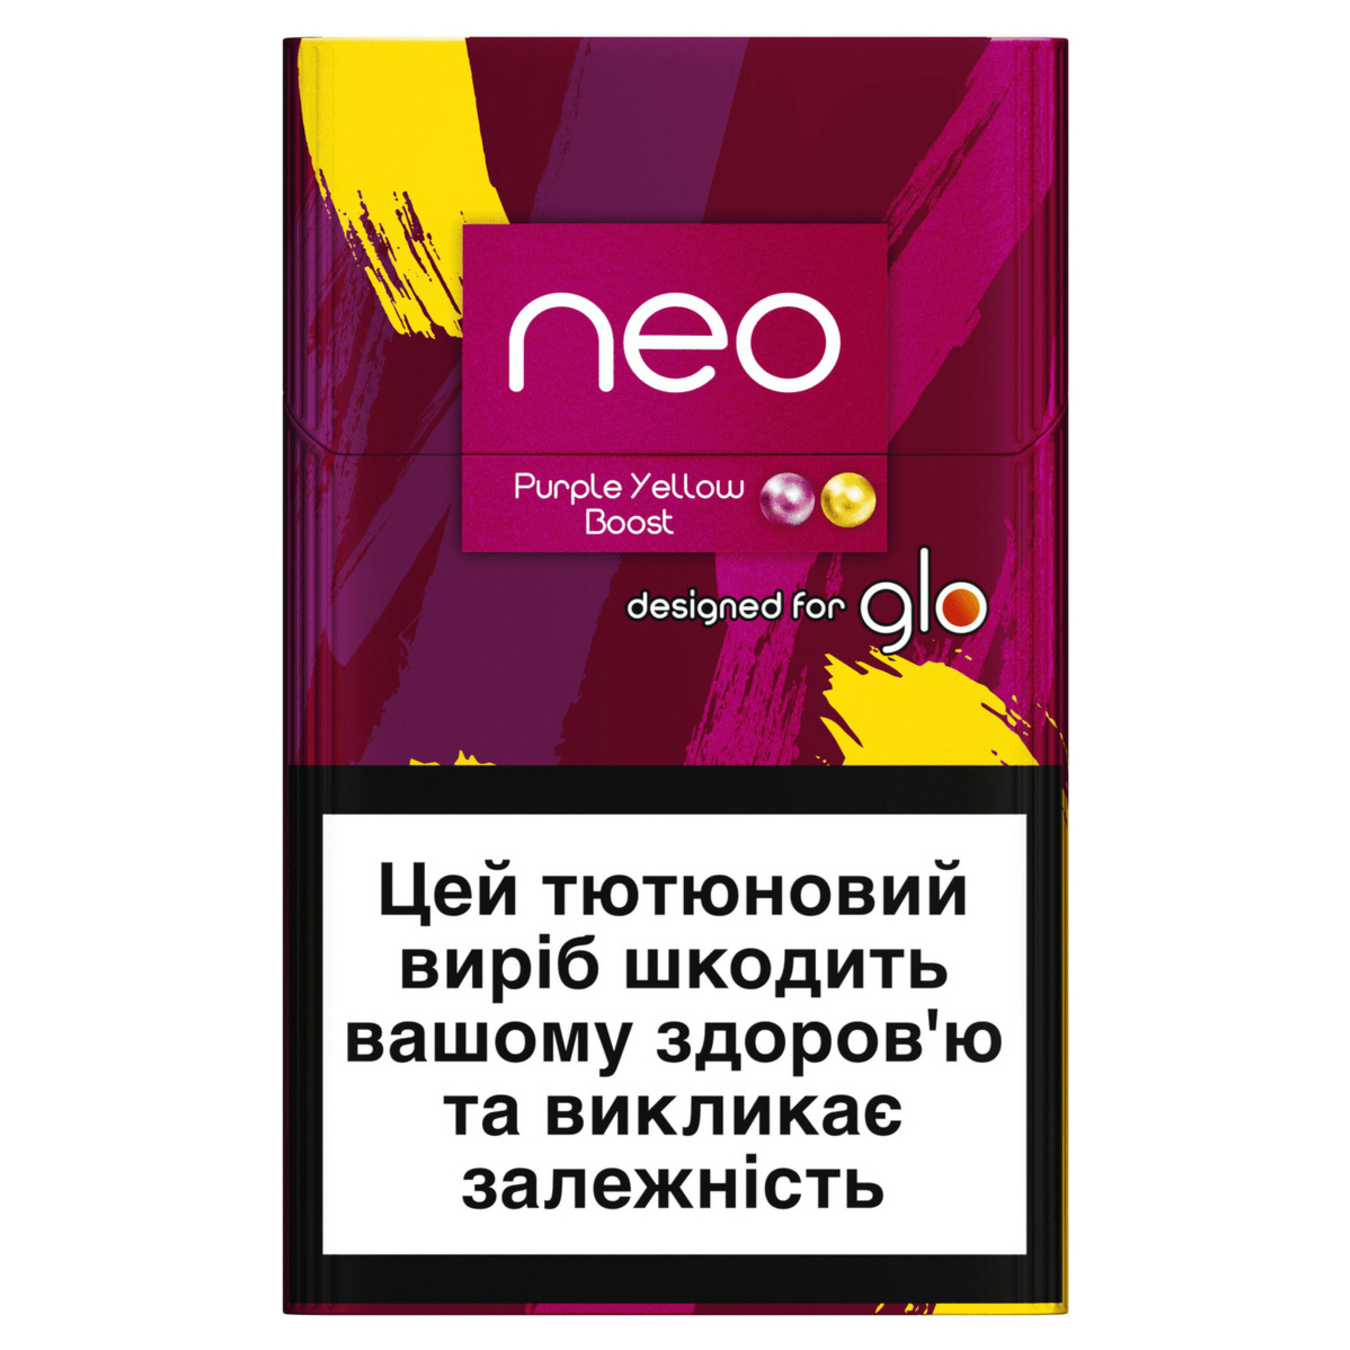 Sticks Neo Demi Pineapple Berry Mix for Tobacco Heating 20 pcs (the price is indicated without excise tax)